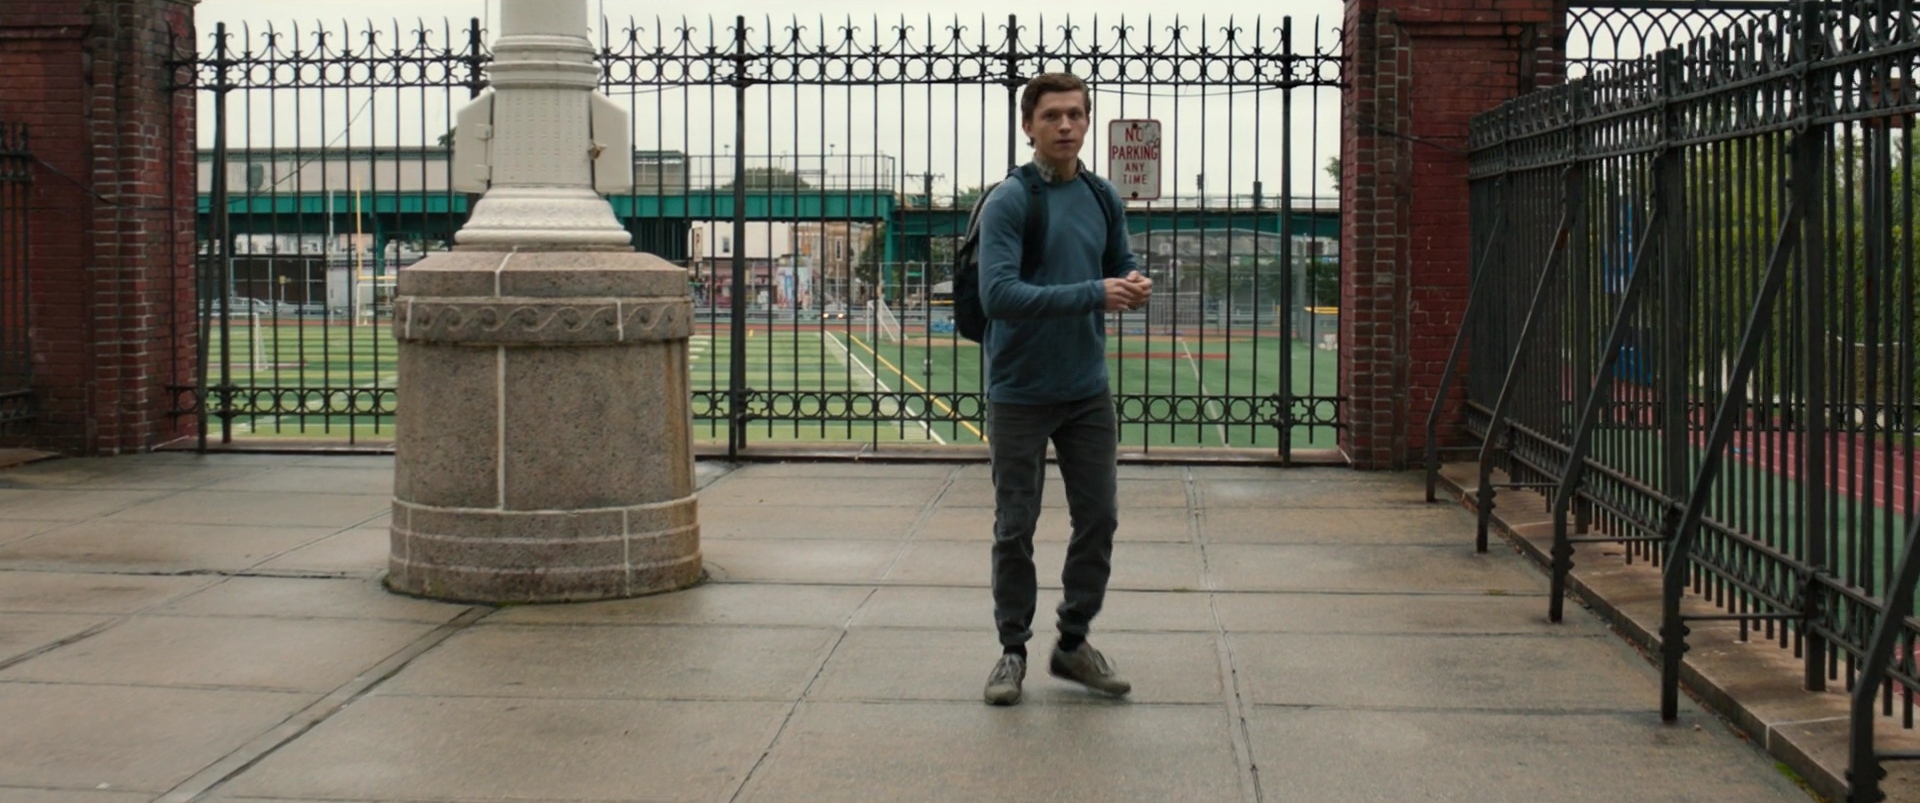 New Balance Shoes Worn by Tom Holland in Spider-Man: Homecoming (2017) Movie